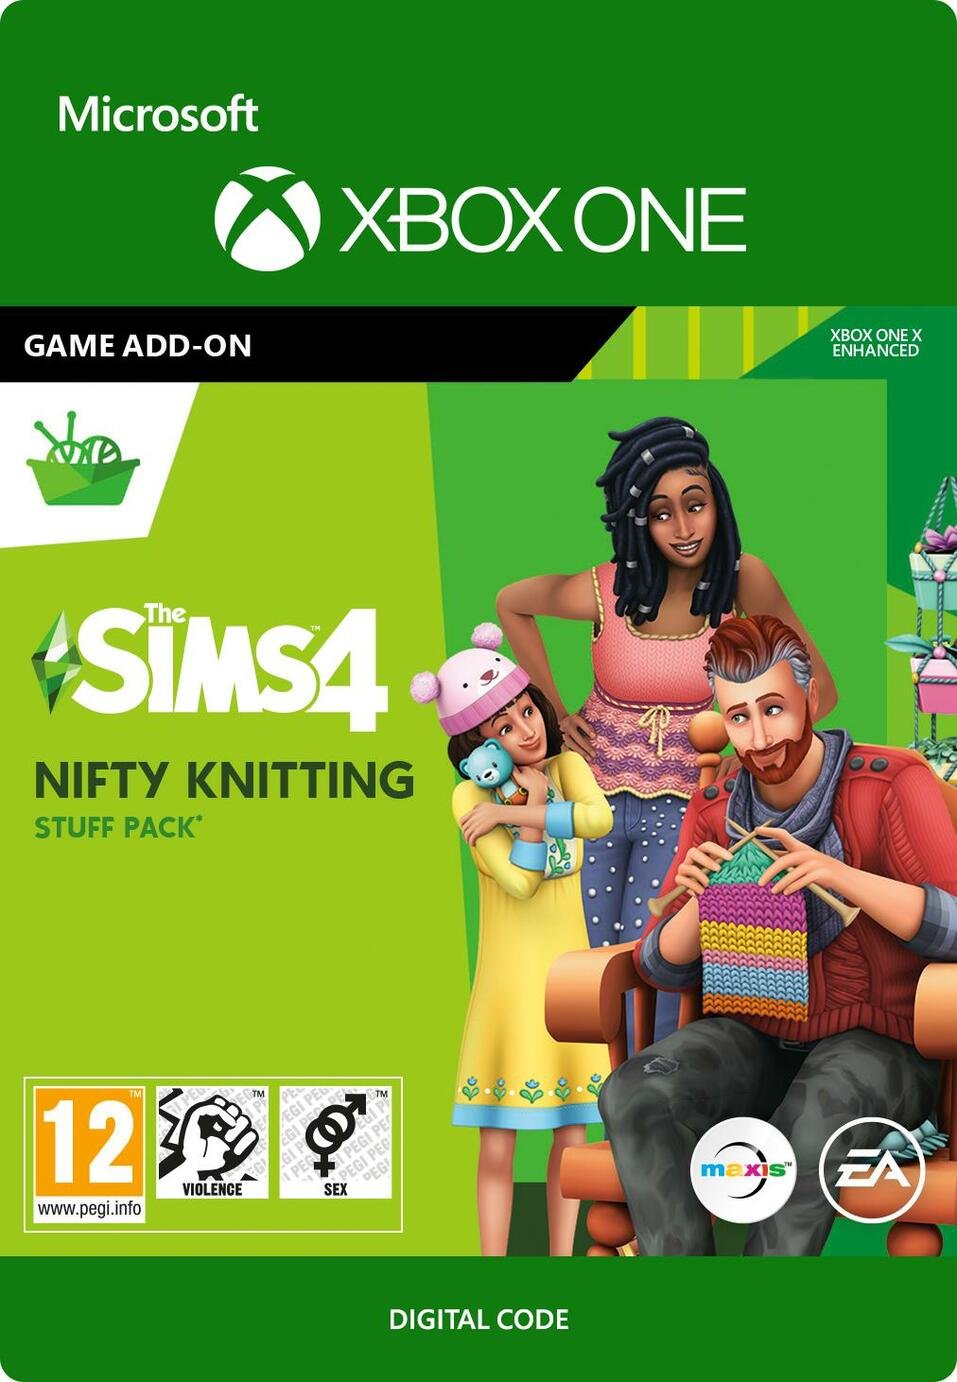 The Sims 4: Nifty Knitting Xbox Game - Digital Download